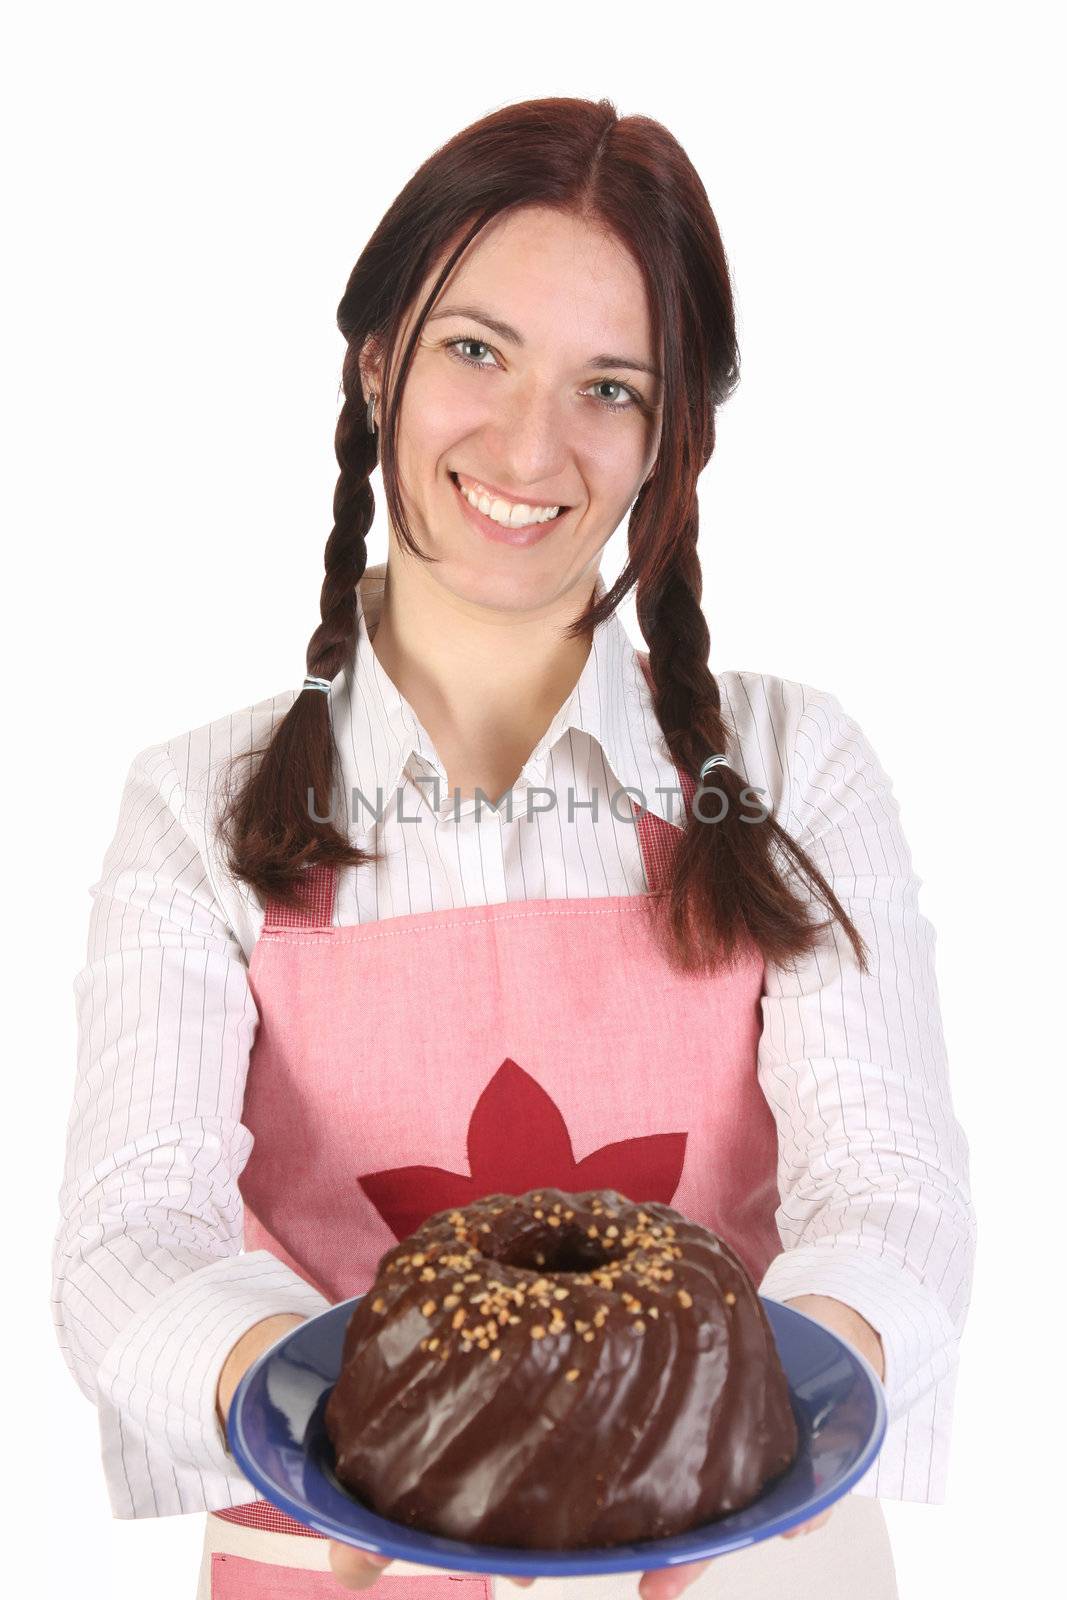 beautiful housewife showing off bundt cake on white background